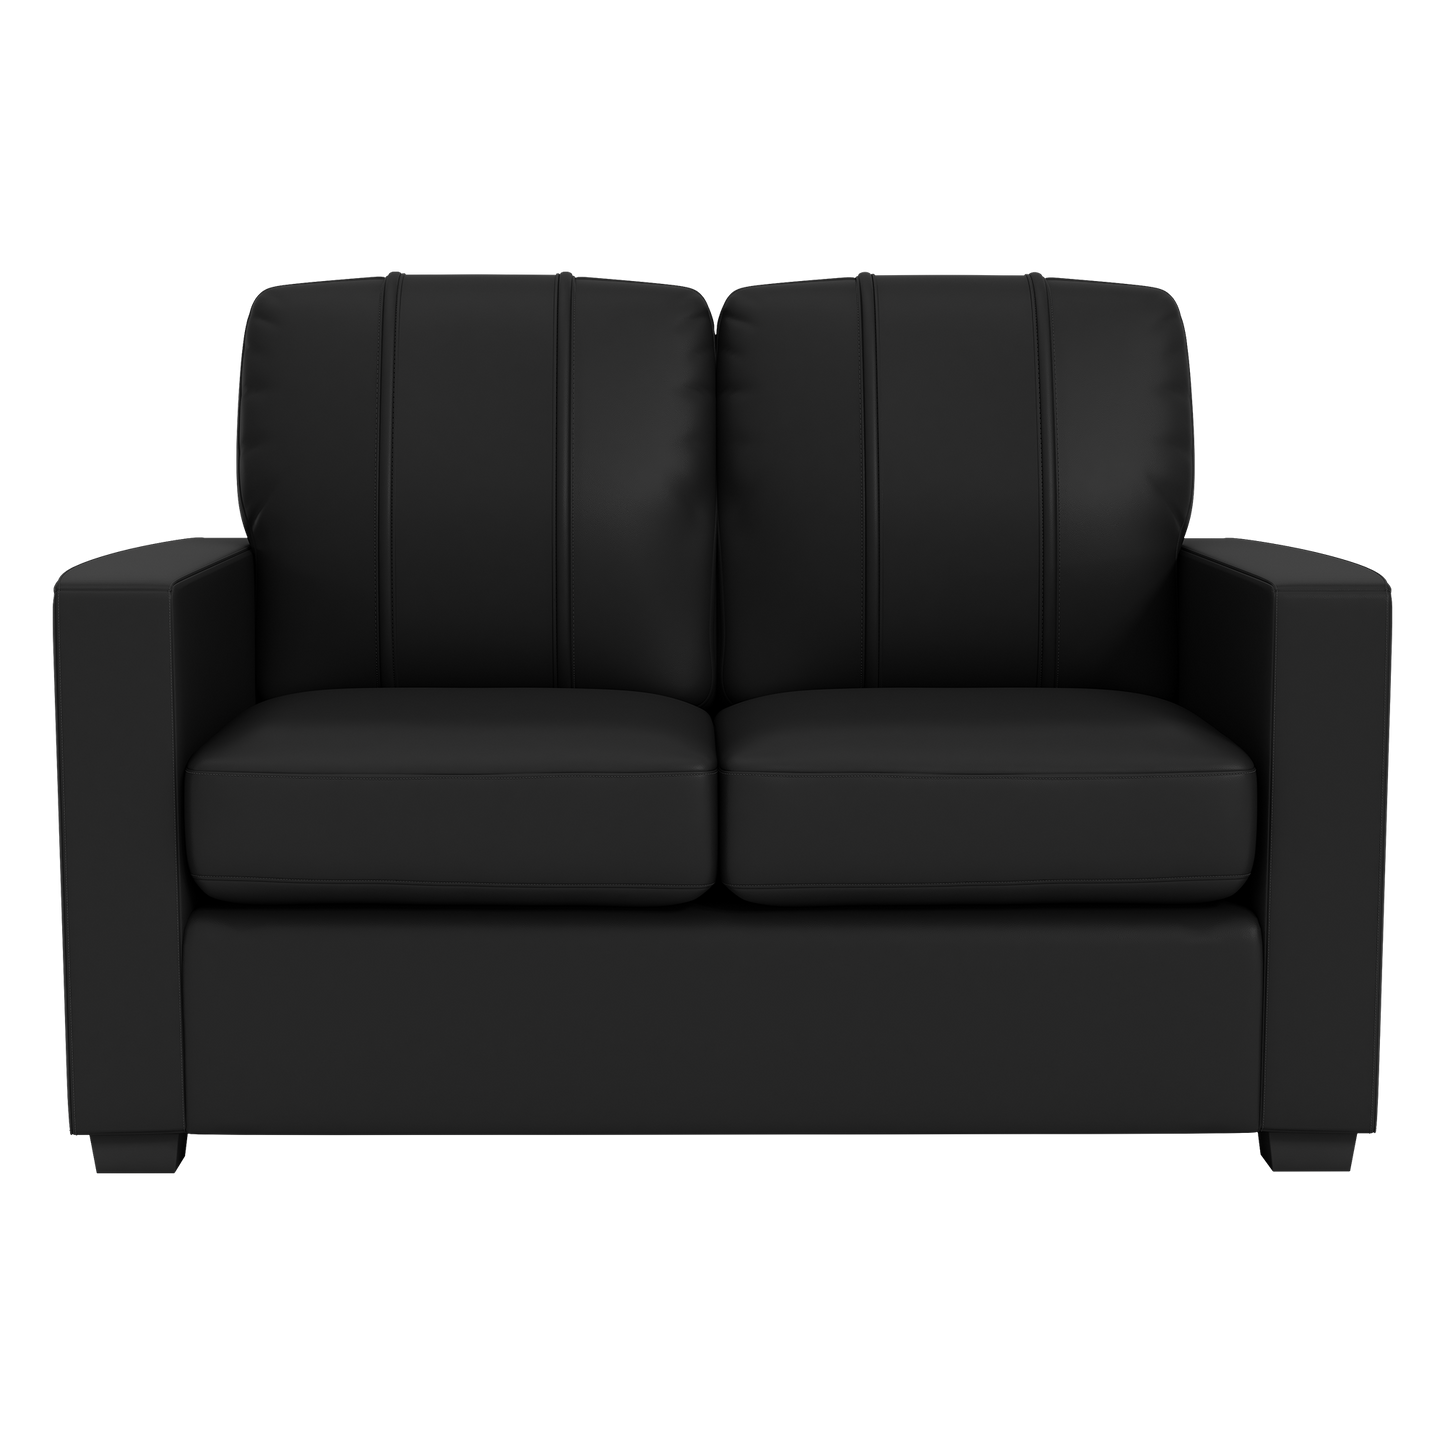 Silver Loveseat with Phoenix Suns Secondary